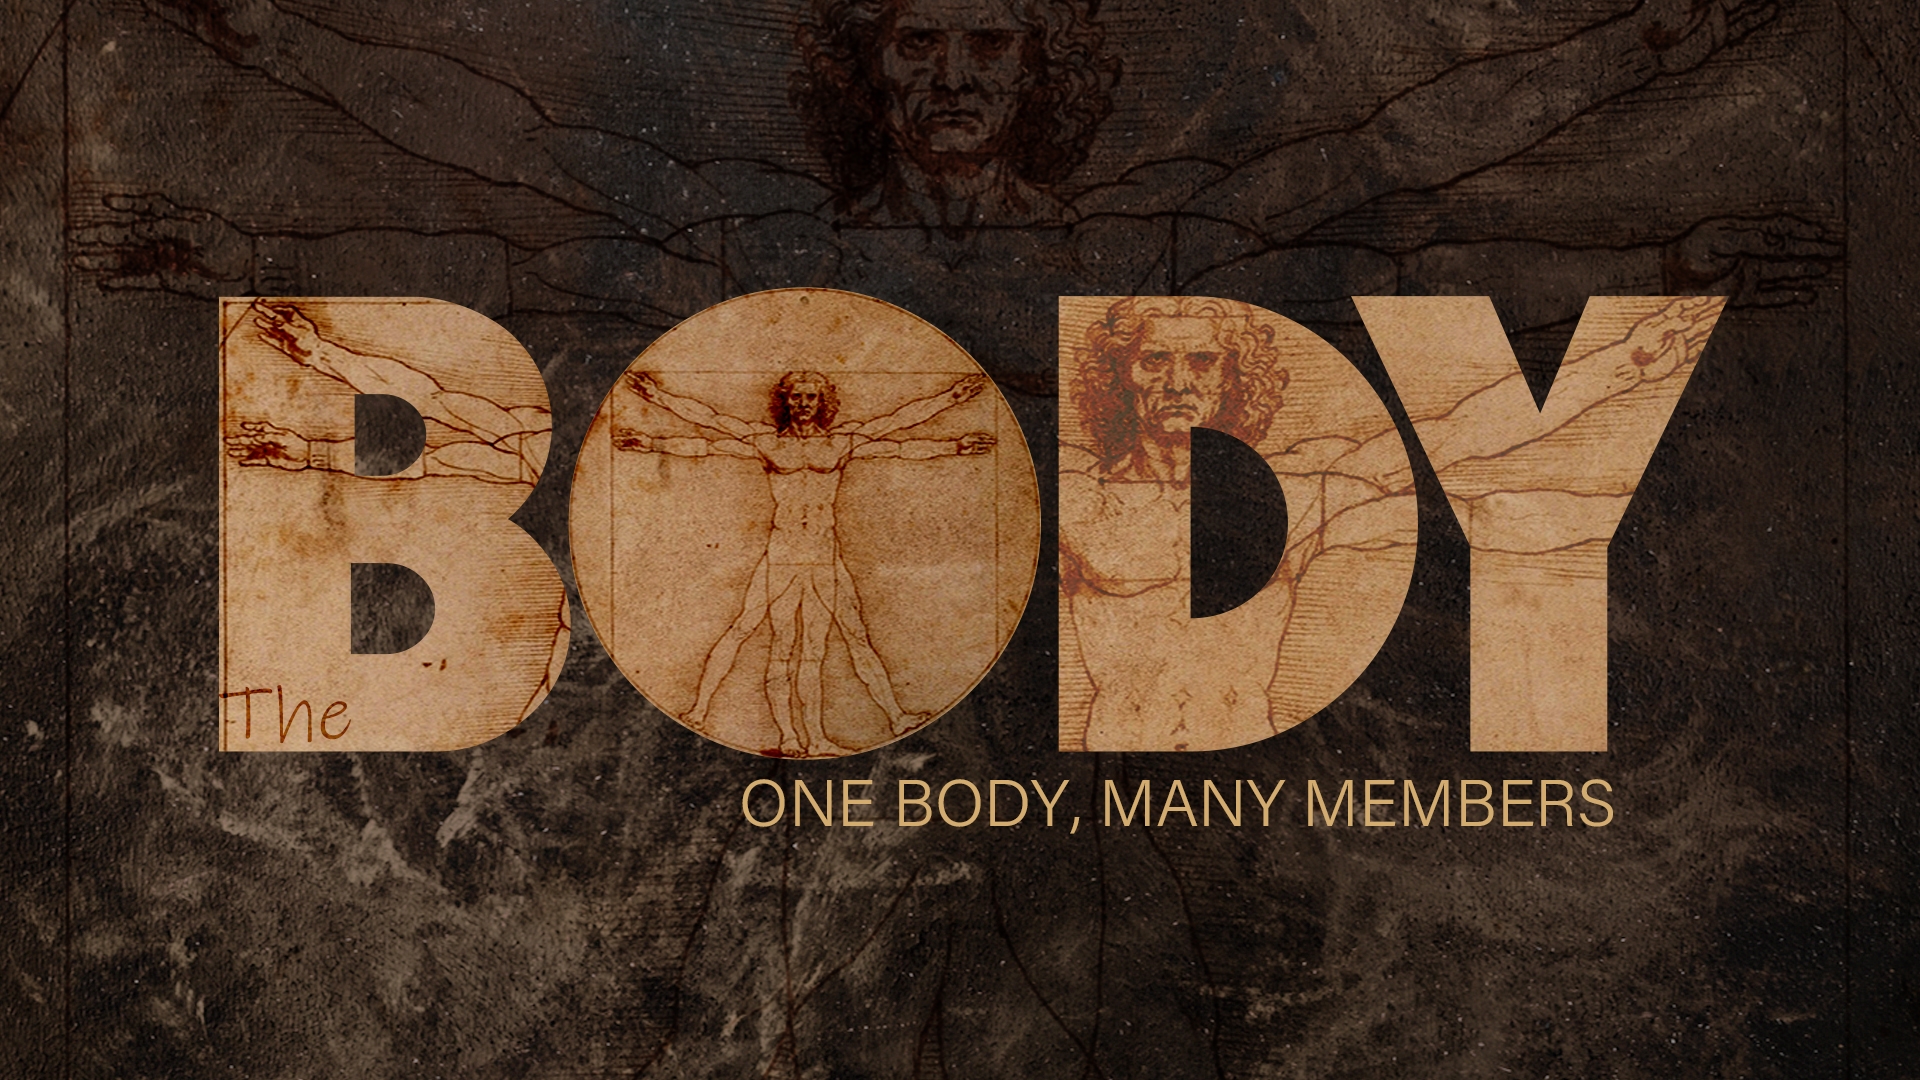 The Body: We Need Each Other